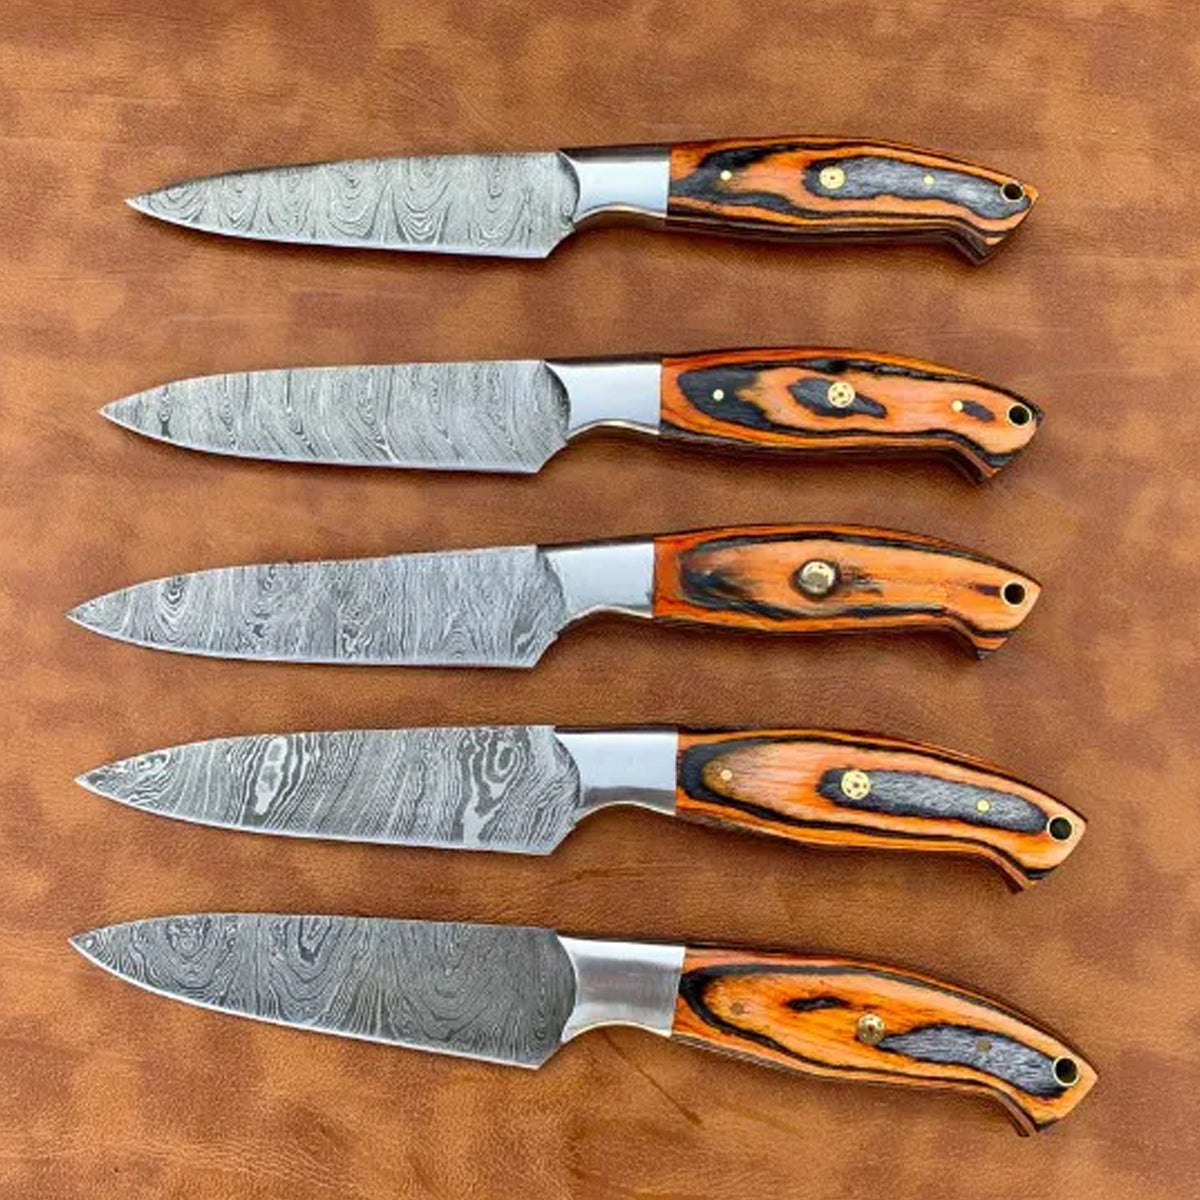 Set of 5 Wade Damascus Steak Knives with Leather Roller Bag - Notbrand